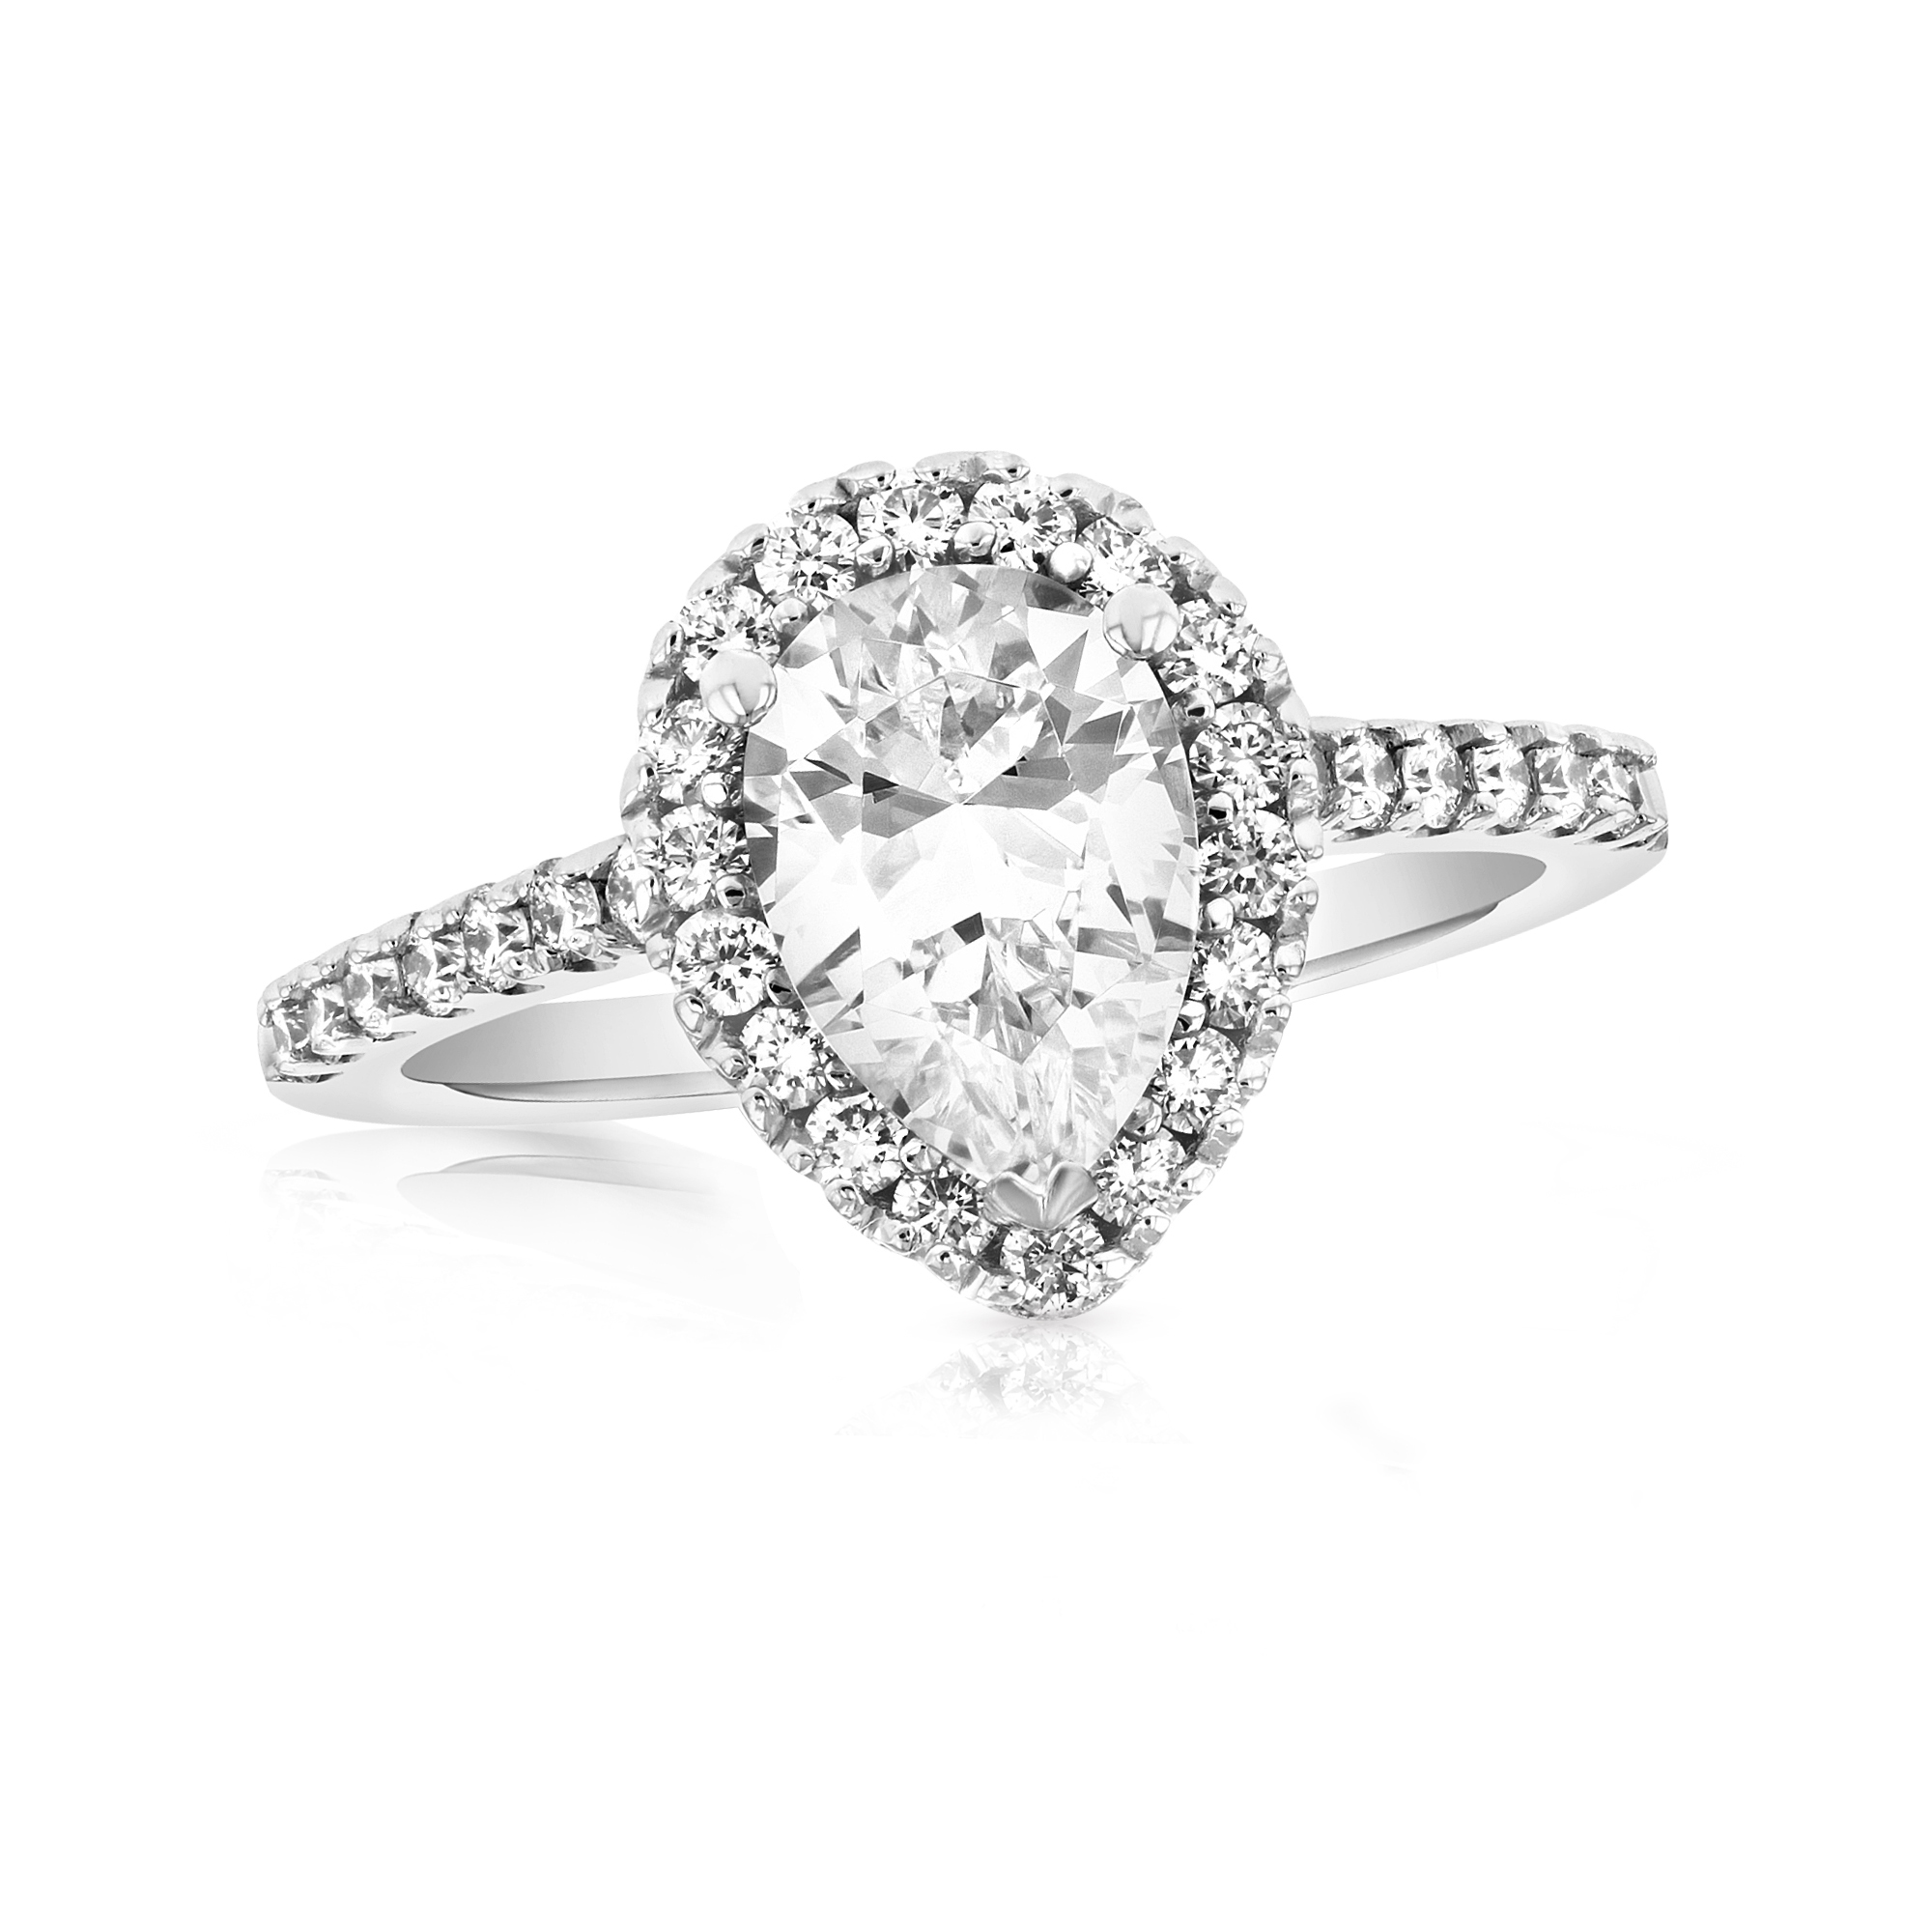 View 1.83ctw Pear Shaped Diamond Engagement Ring in 14k White Gold